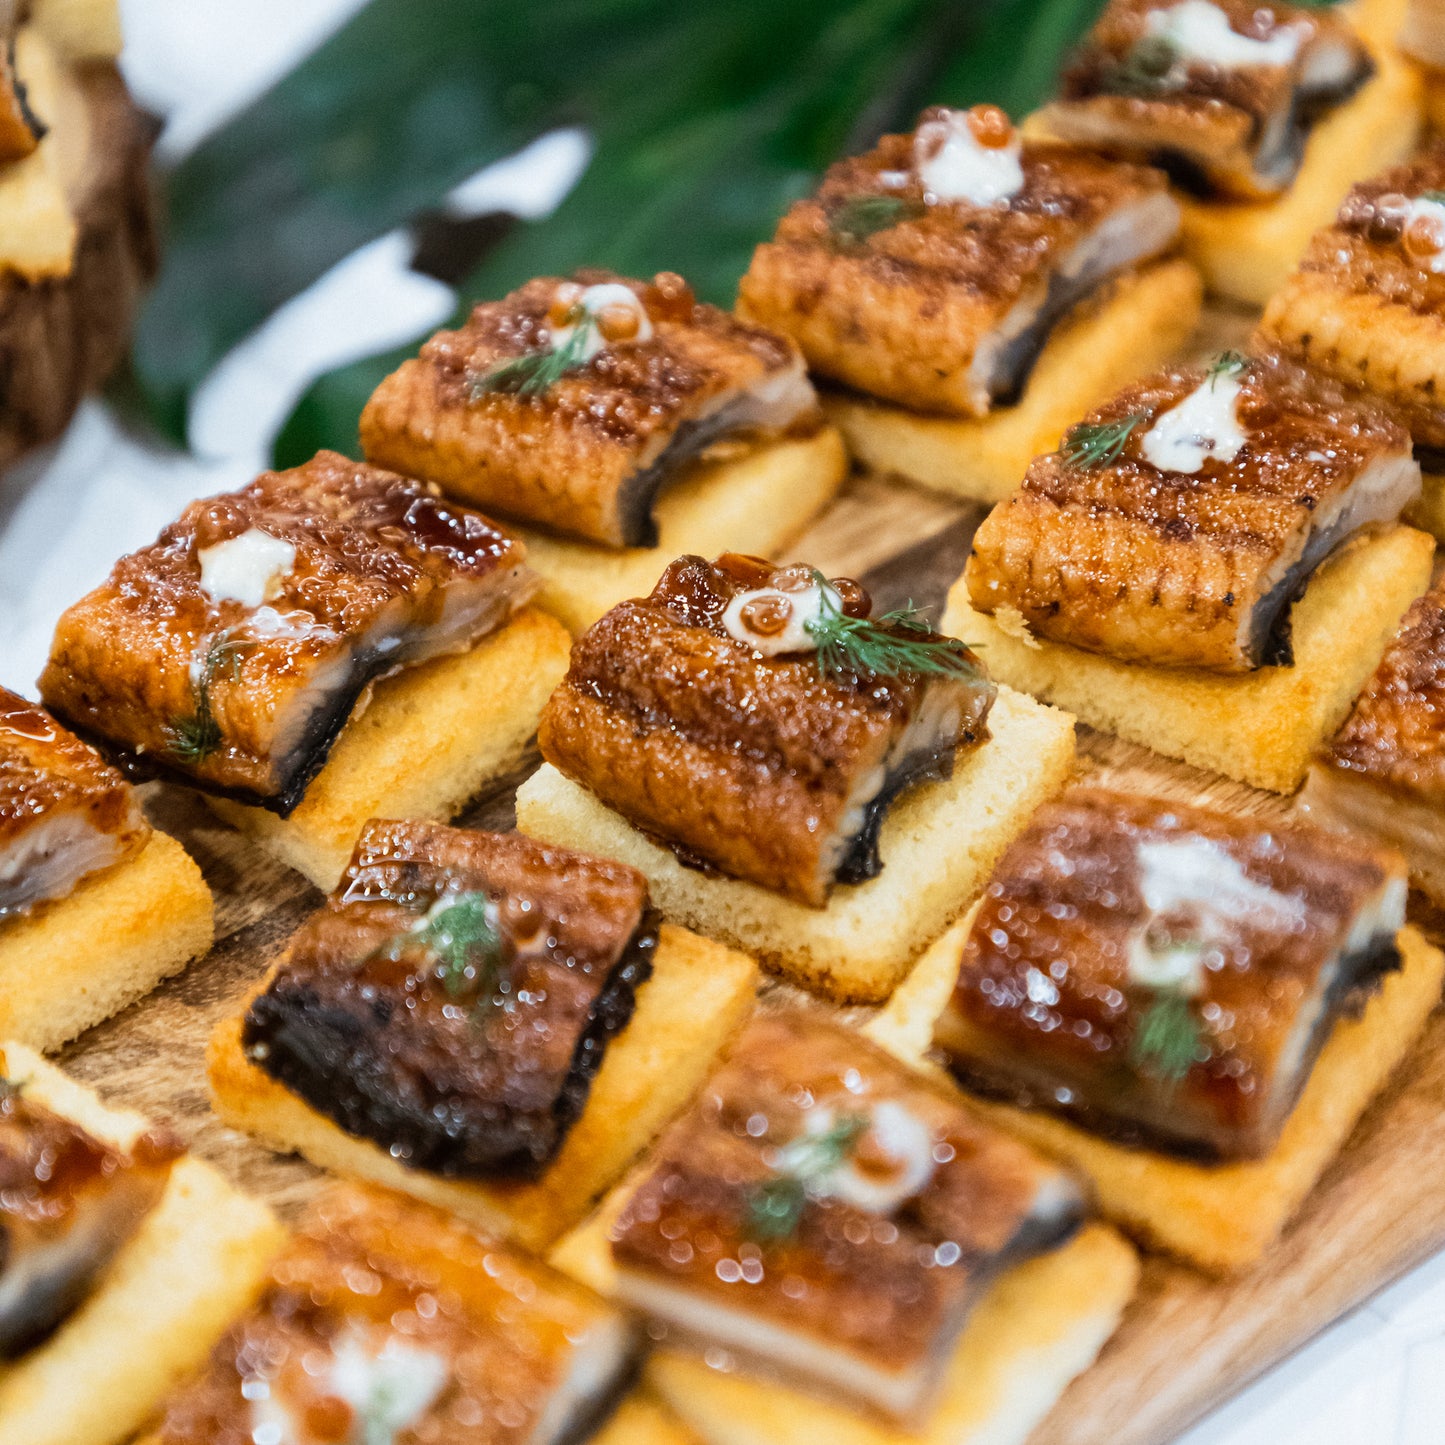 Canapé & Light Bites Catering - Deluxe Set (from $640 for 20pax)